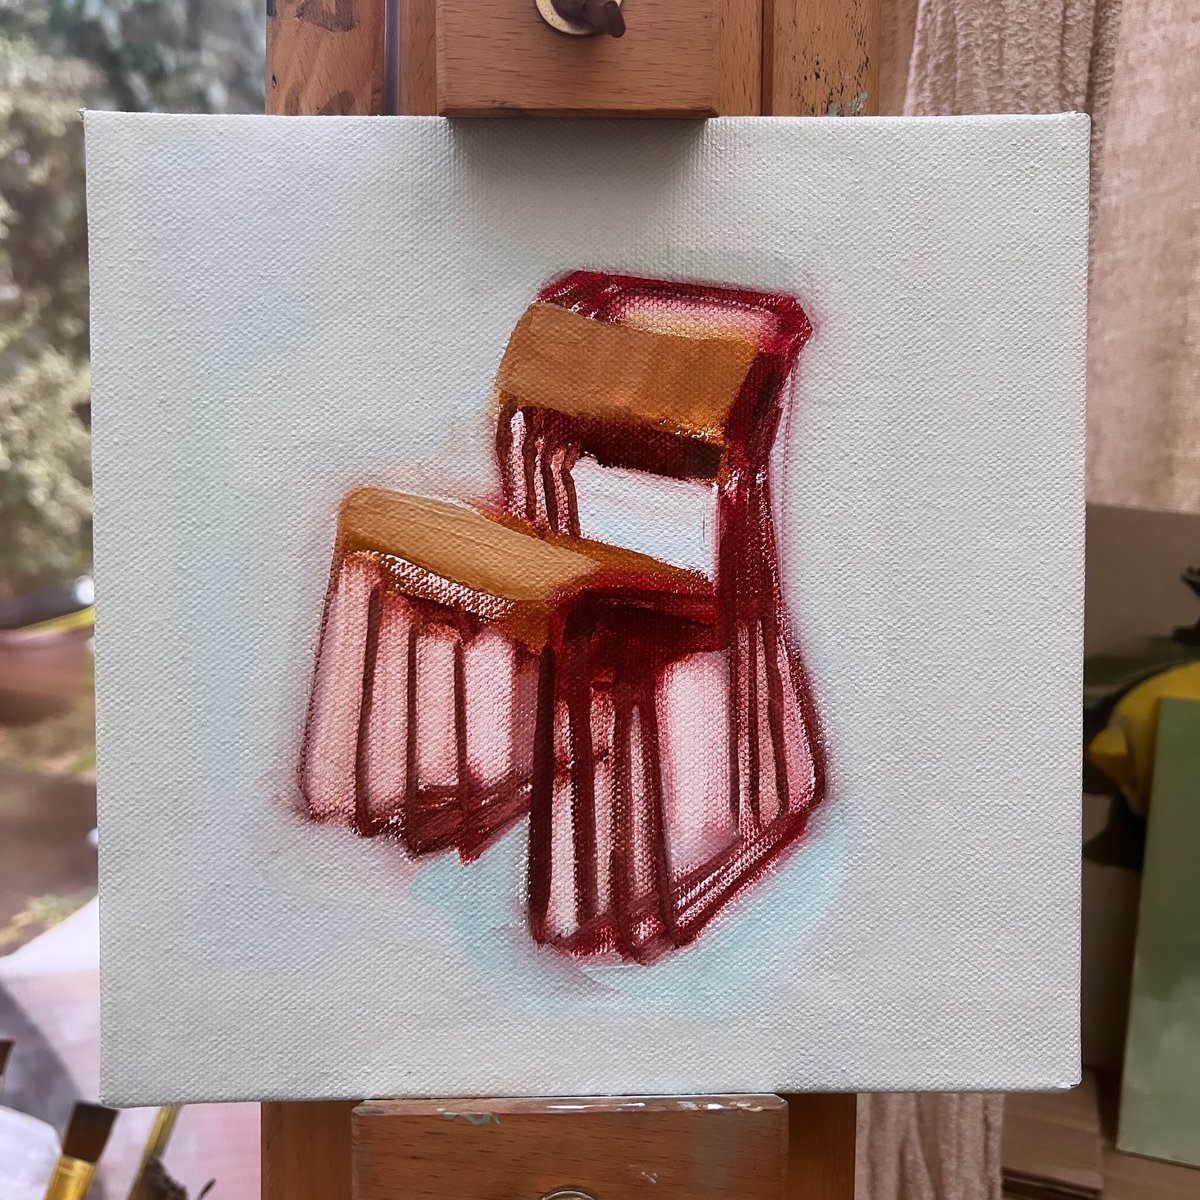 Today’s chair study. A stack of school chairs. #allaprima #painting #oilpainting #freshpaint